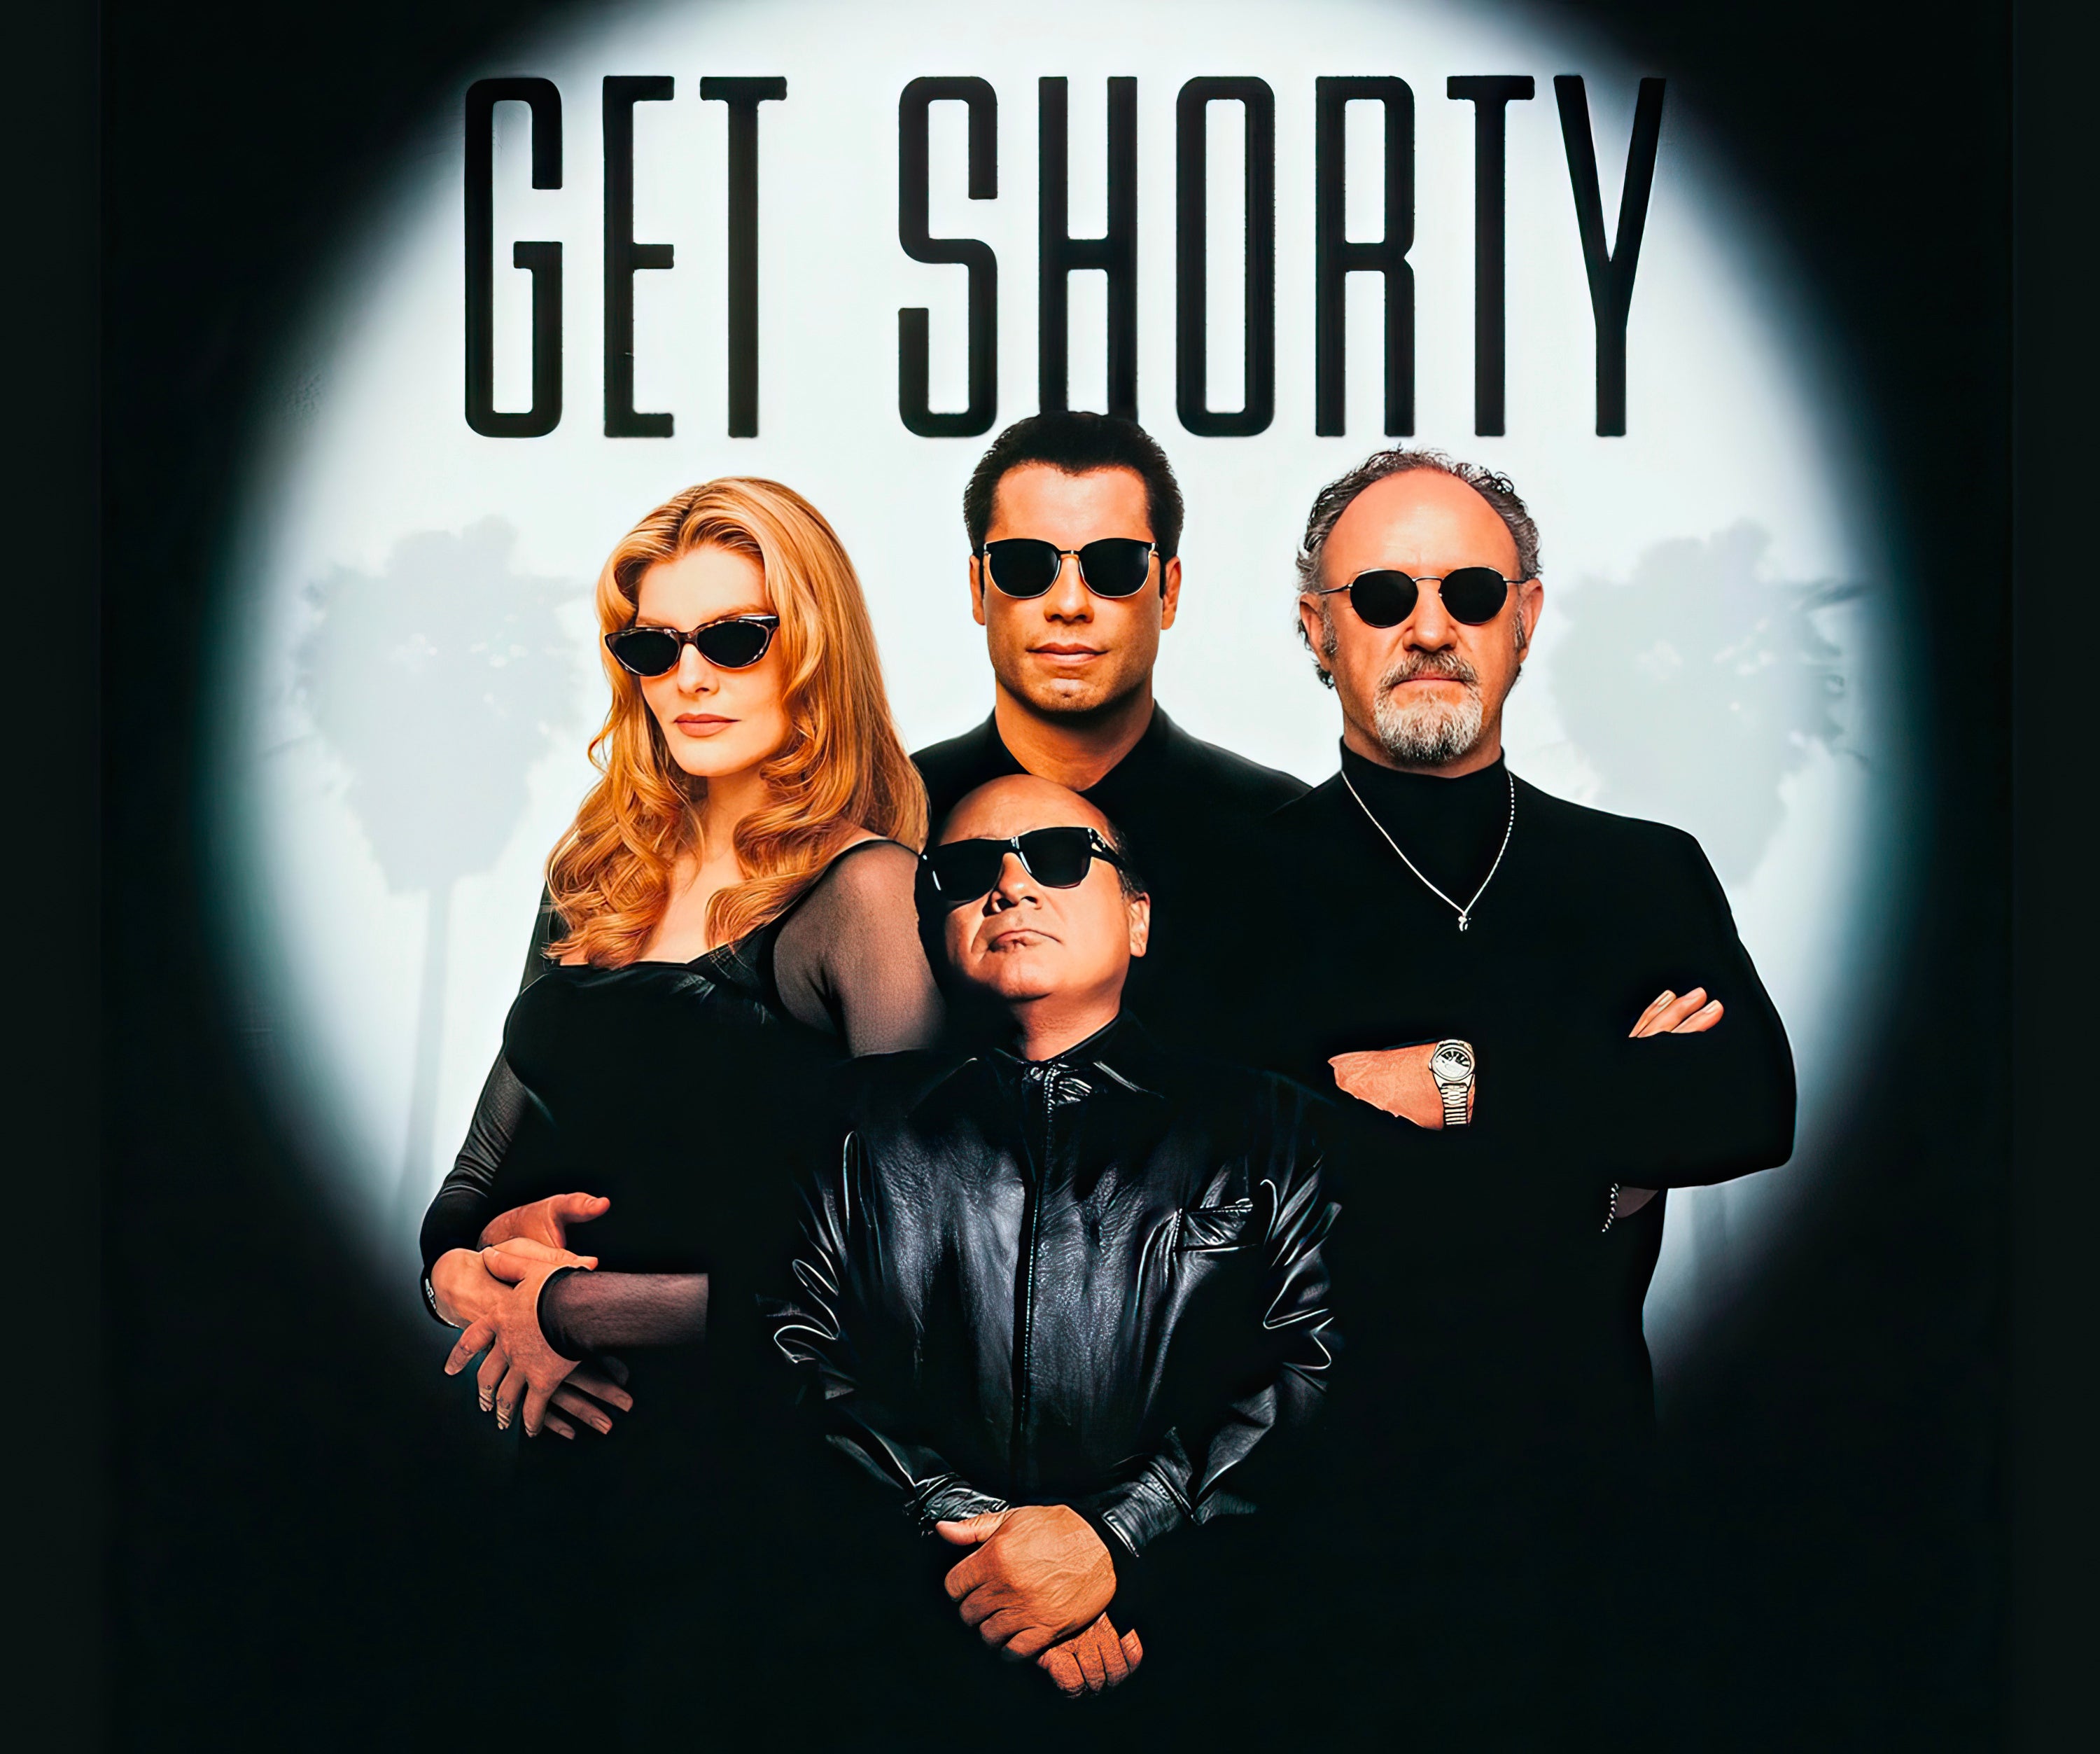 Get Shorty Script Screenplay - Image of Movie Poster